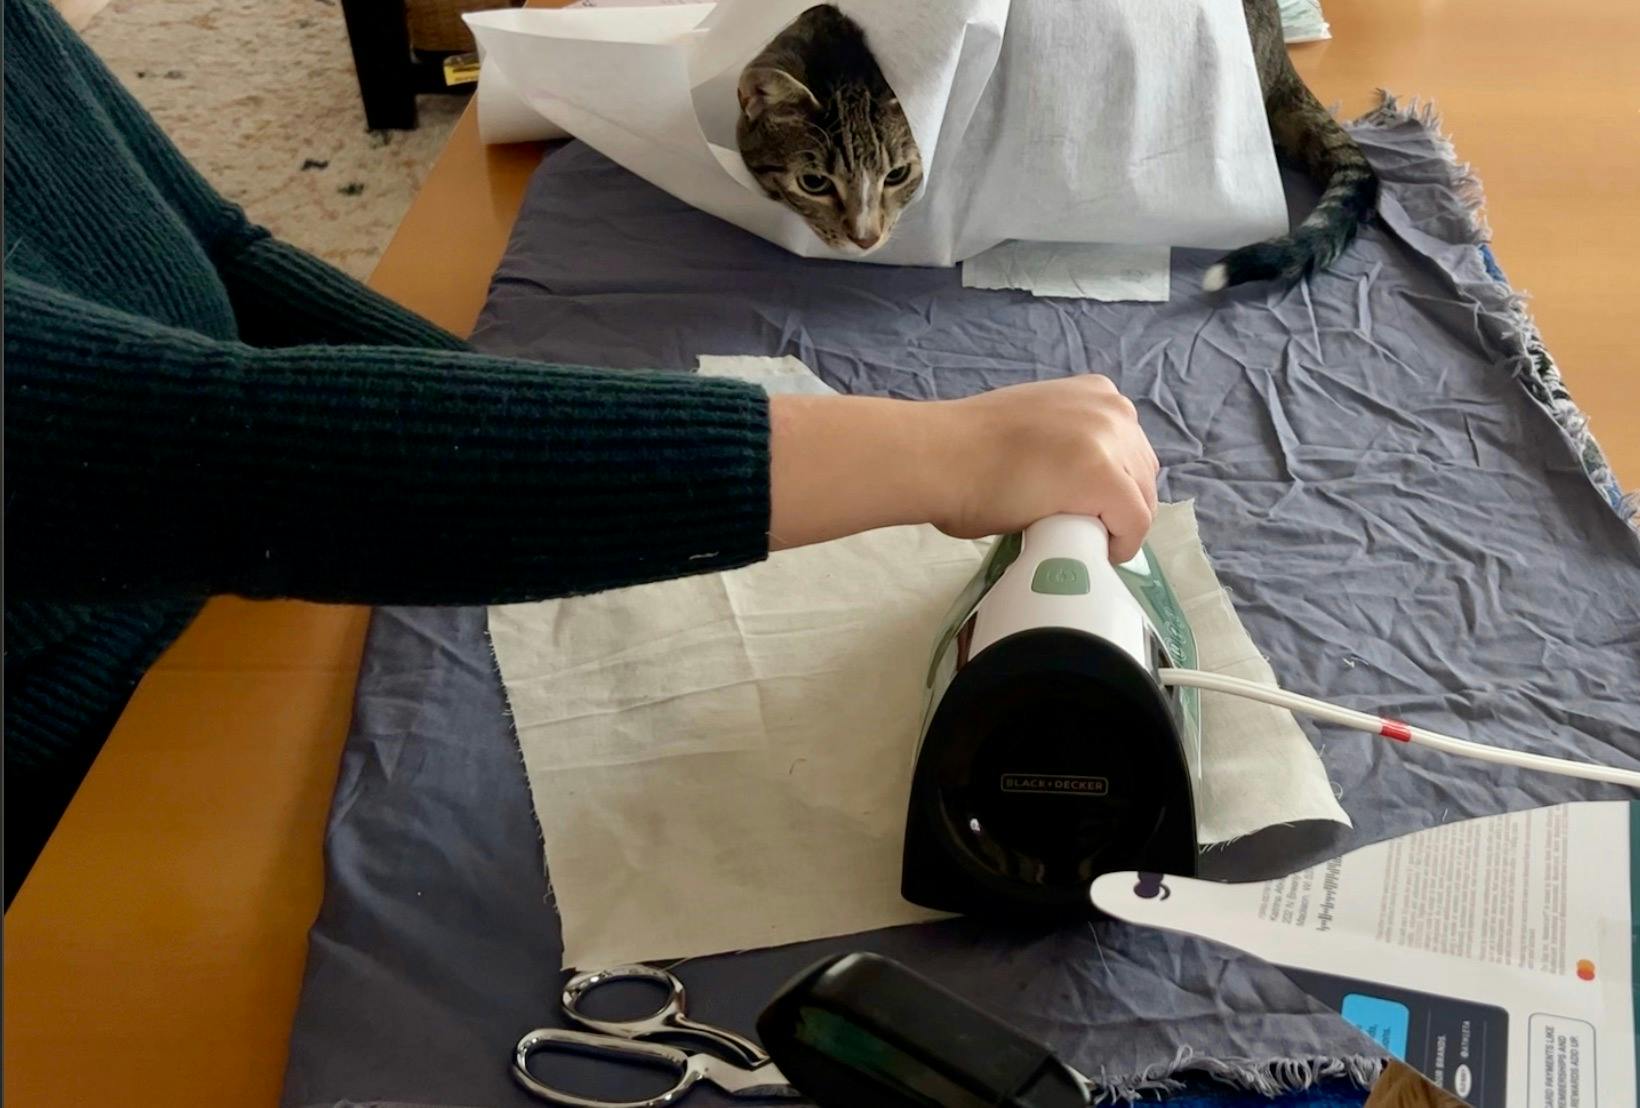 pressing interfacing onto fabric, with Pete watching from a bundle of interfacing.